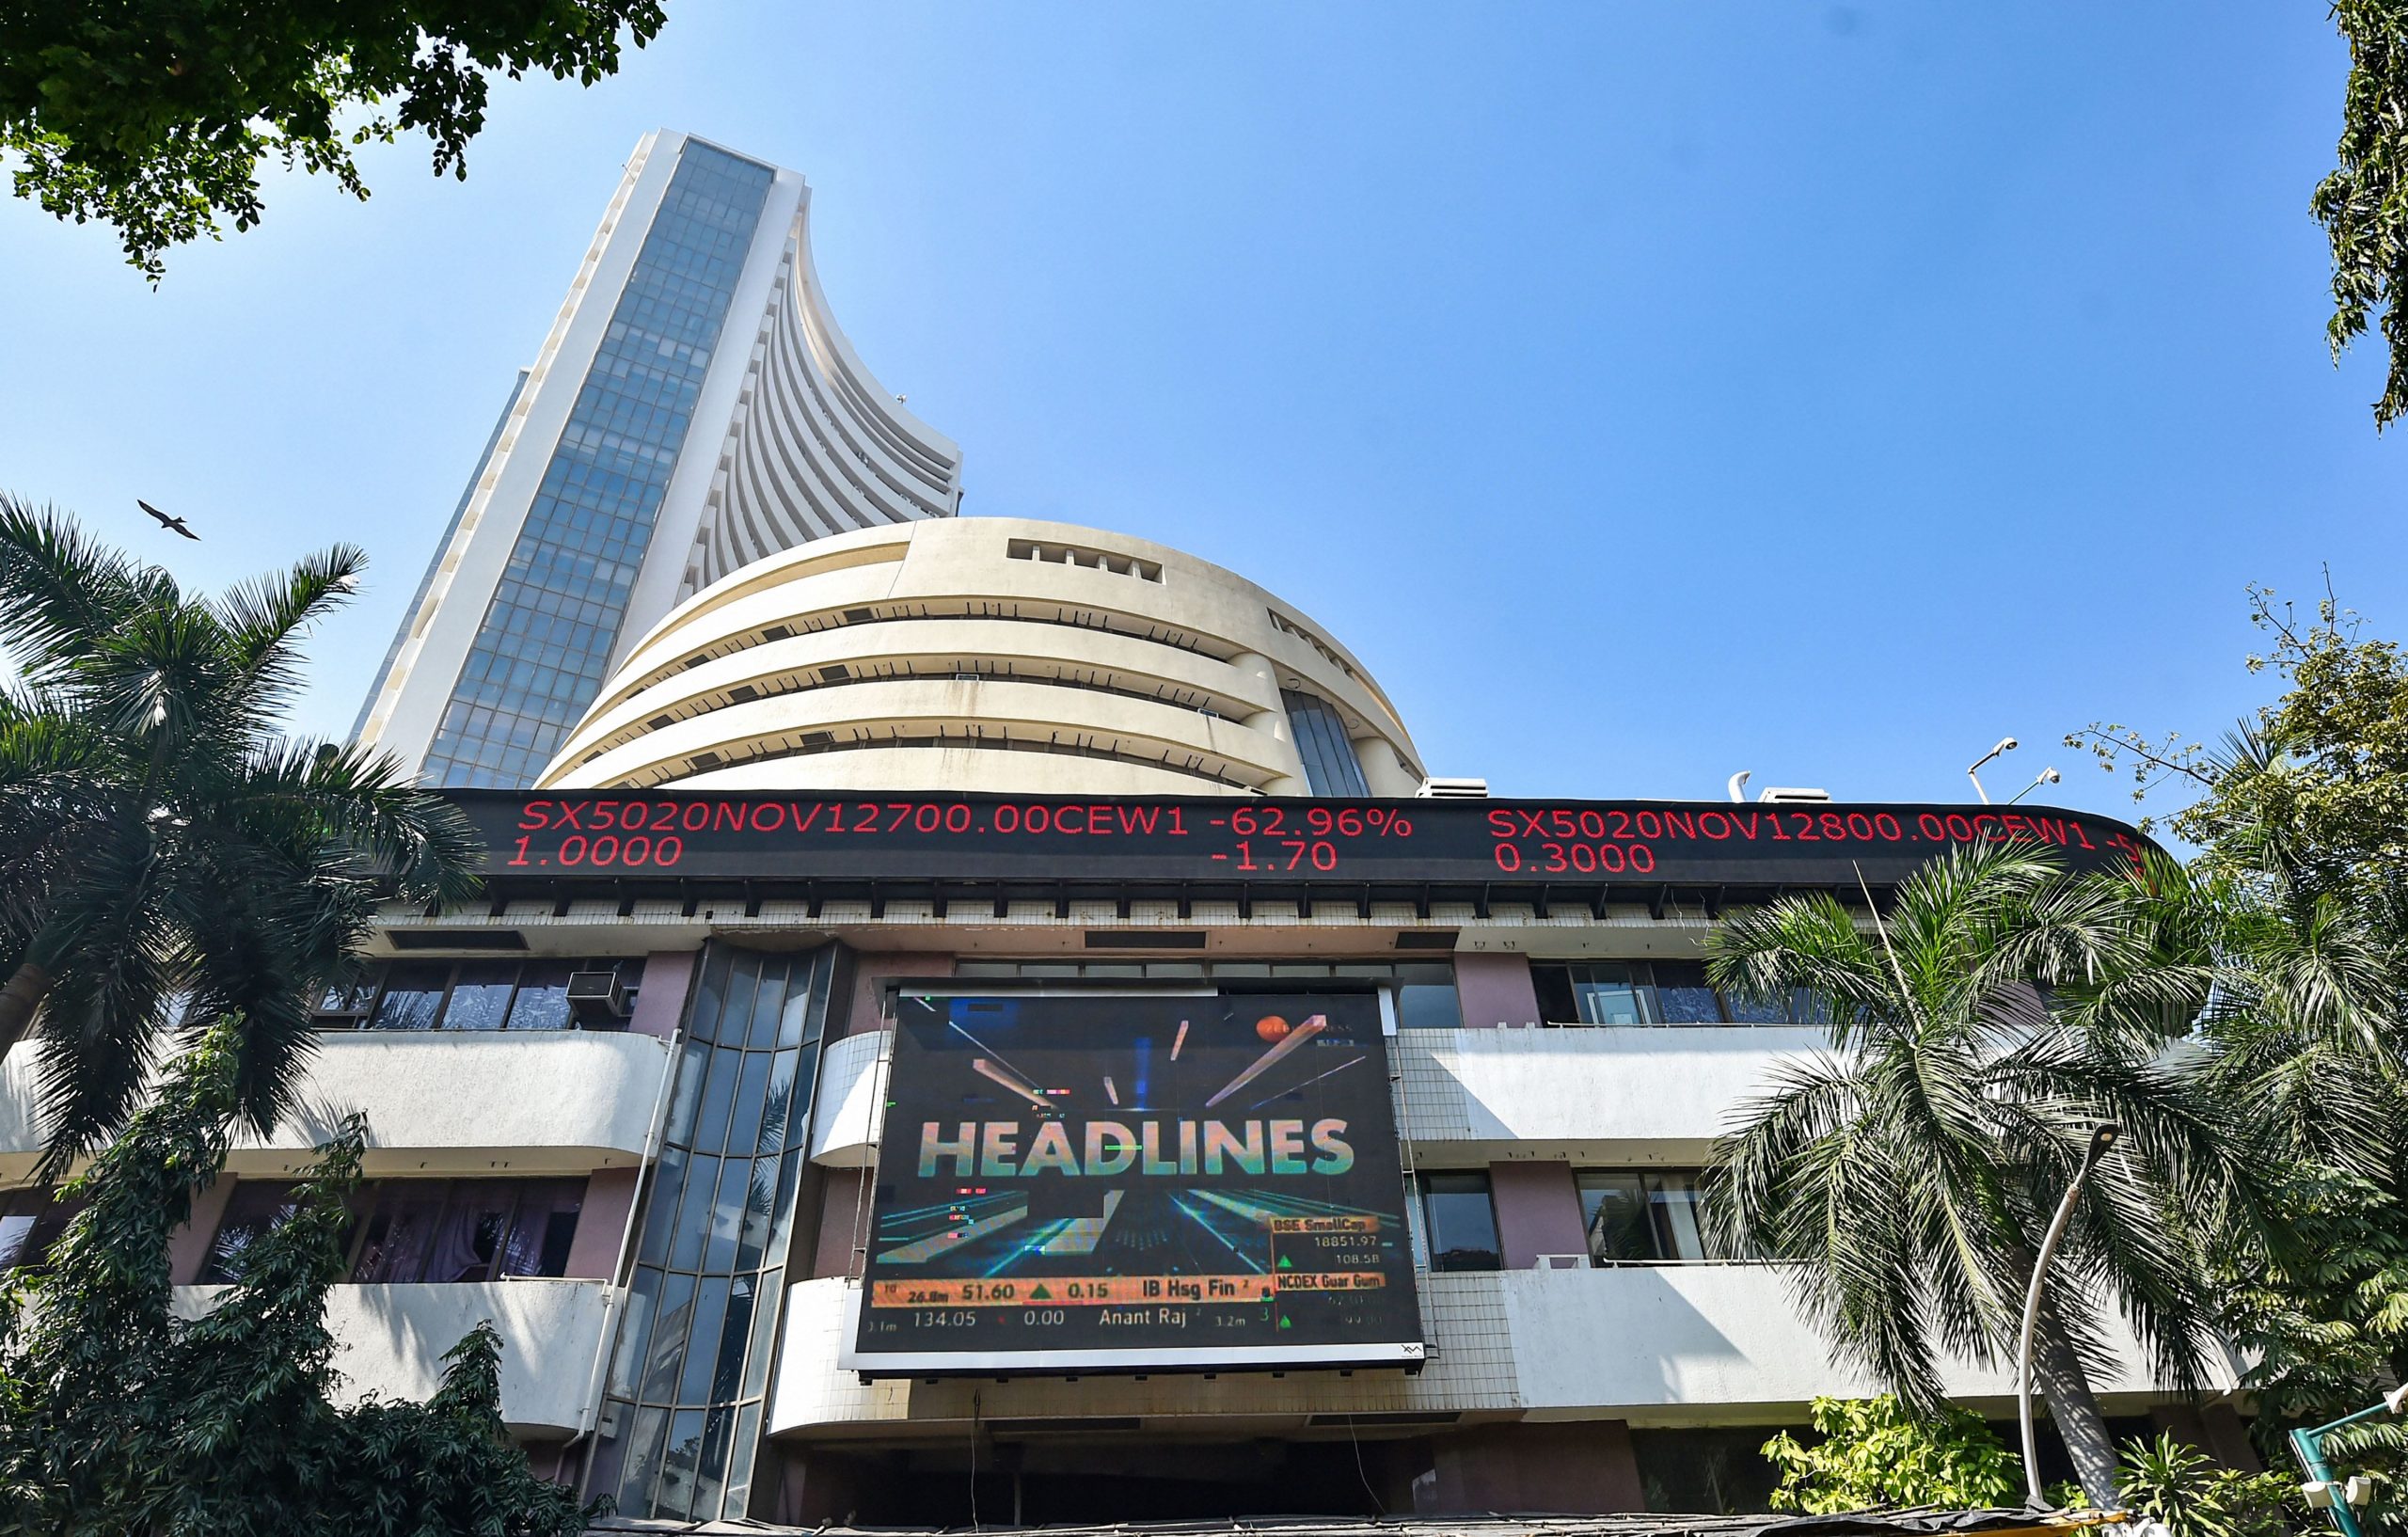 Trending Stocks: RIL, Mindtree, HDFC, TATA Power and others in news today